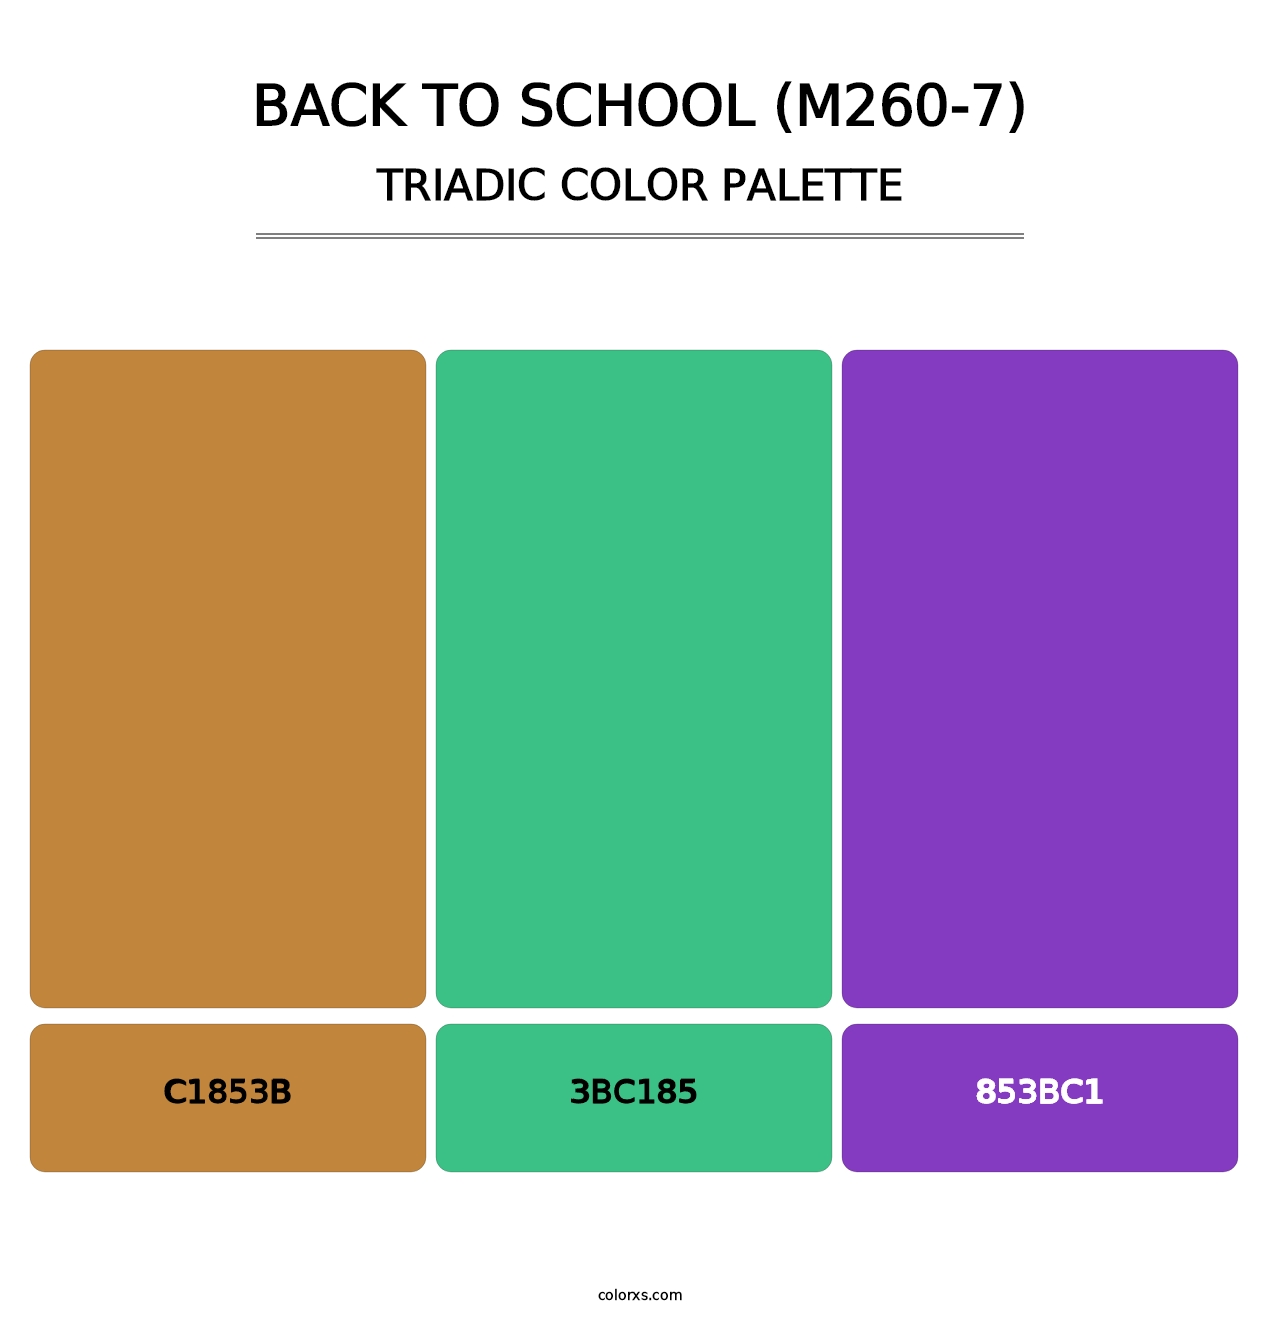 Back To School (M260-7) - Triadic Color Palette